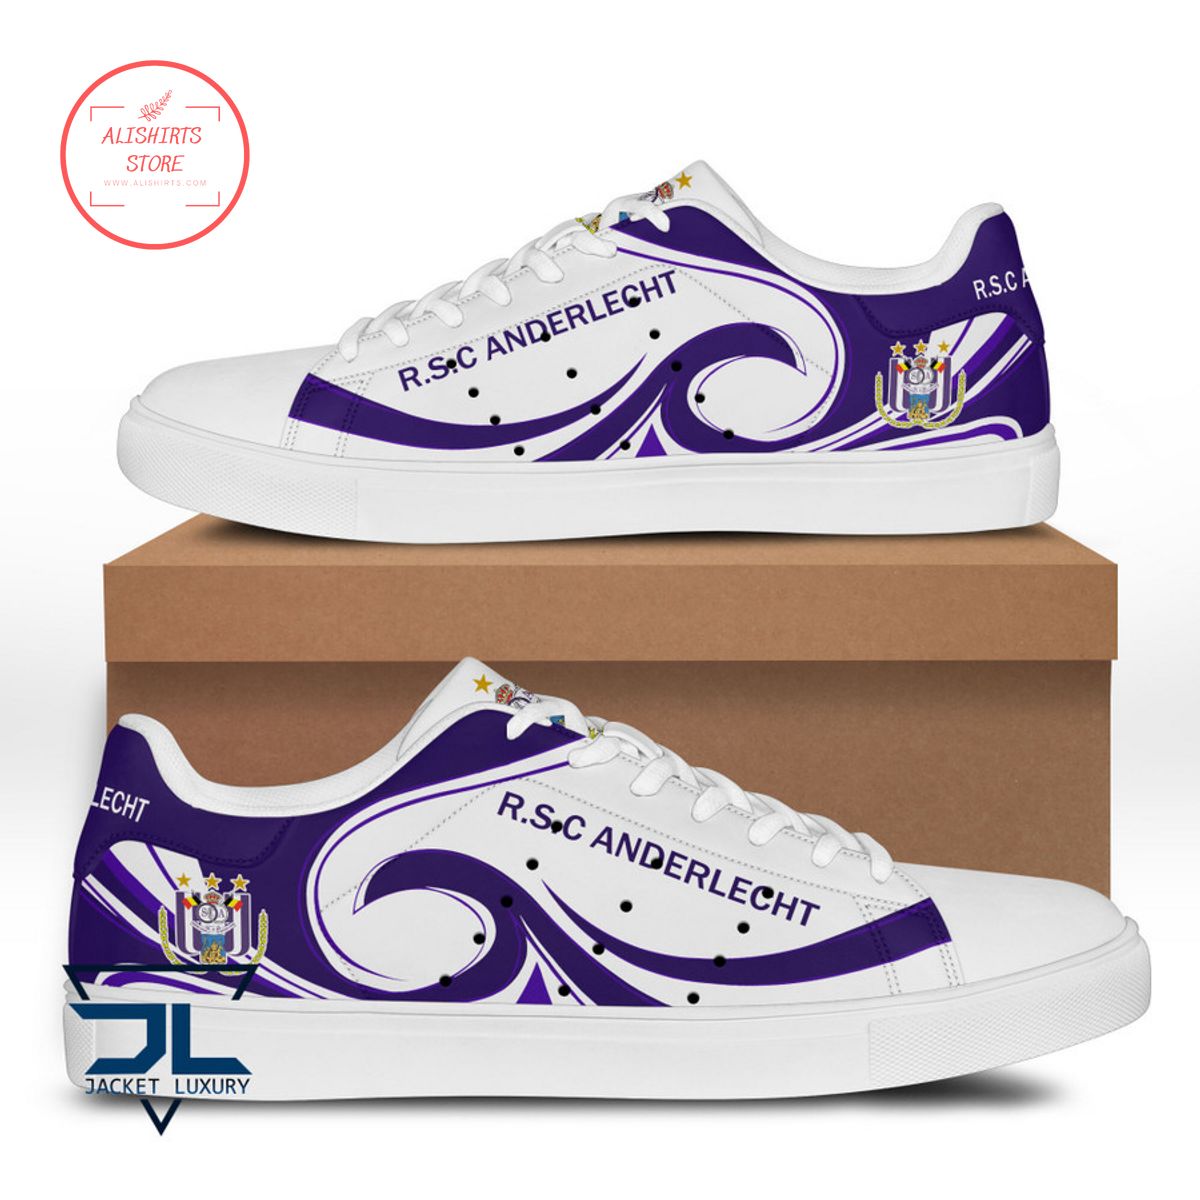 R.S.C. Anderlecht Stan Smith Shoes